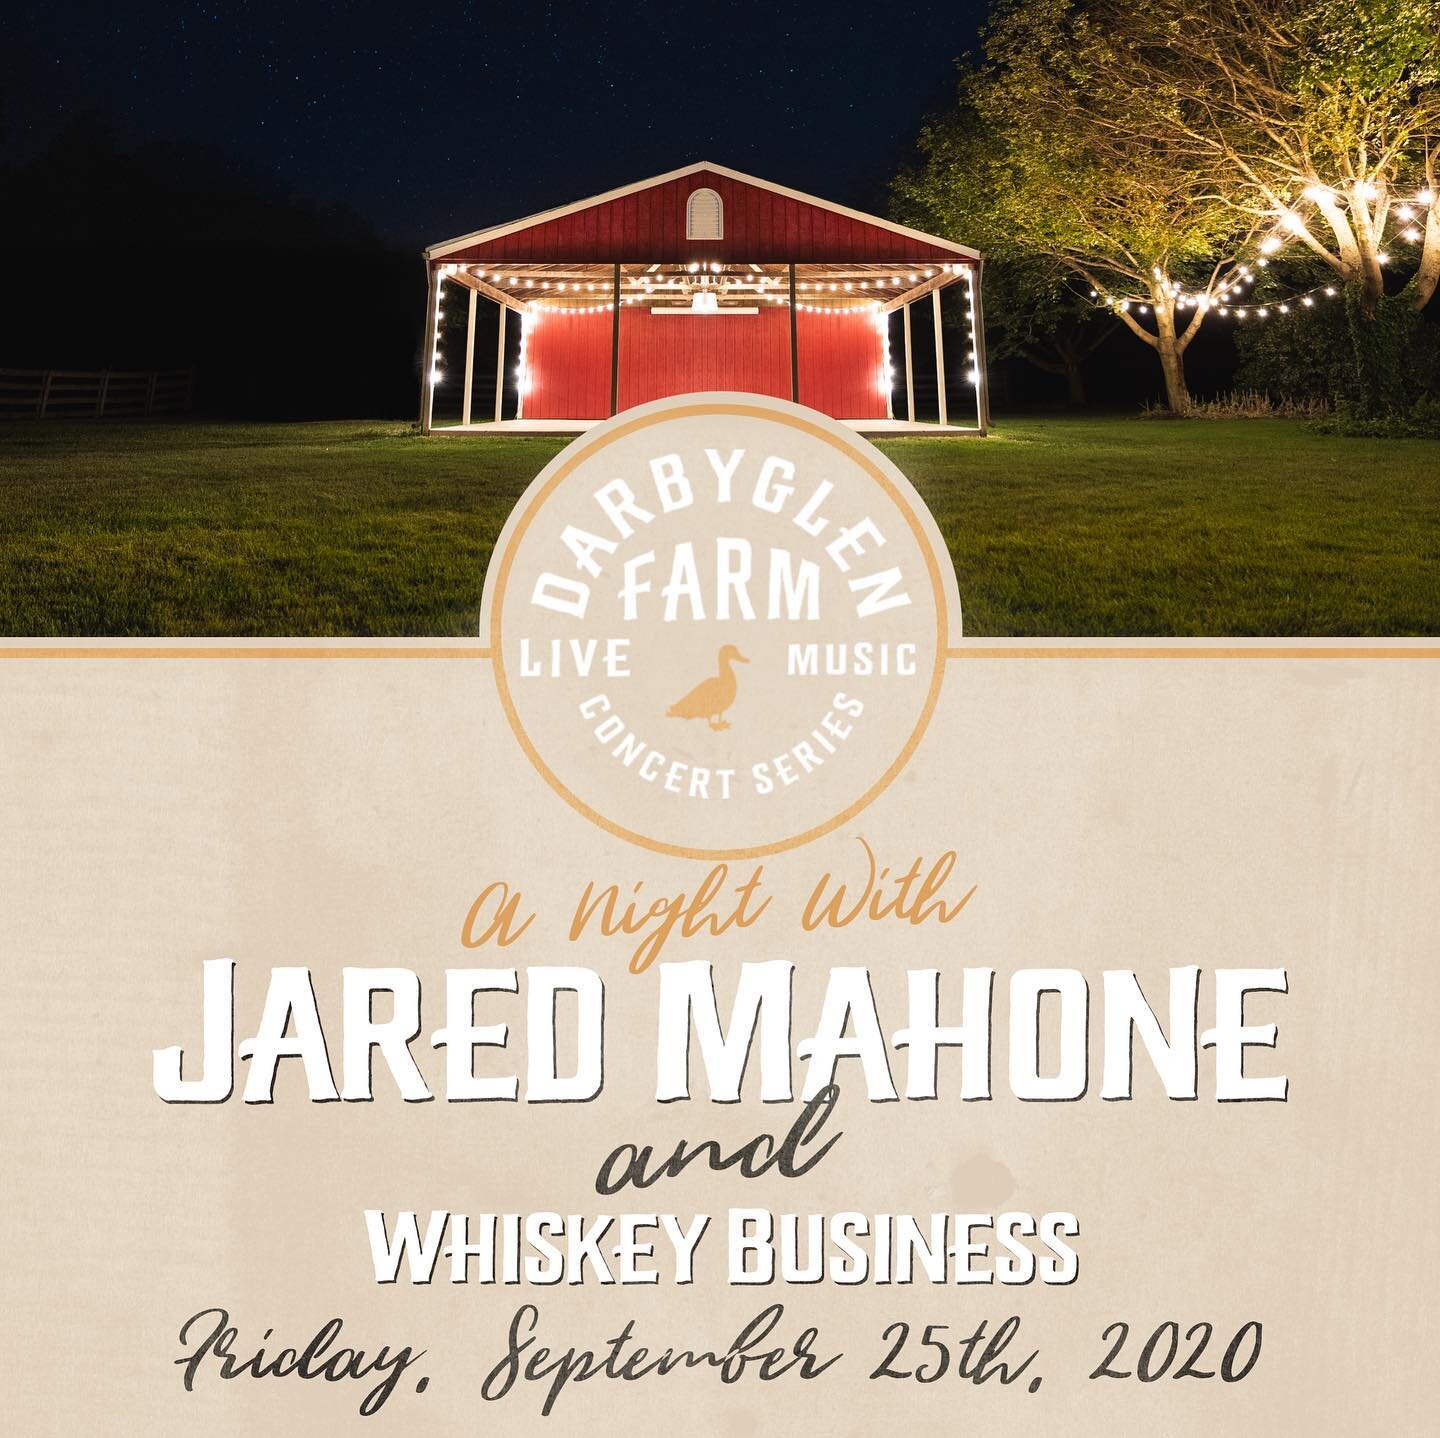 Friends!!! @cadenhuston @_emilysyring and myself have started a concert series in Columbus. To kick things off we have the spectacular @jaredmahone. He&rsquo;s an amazing songwriter/musician with the perfect vibe for these shows. Head over to @darbyg